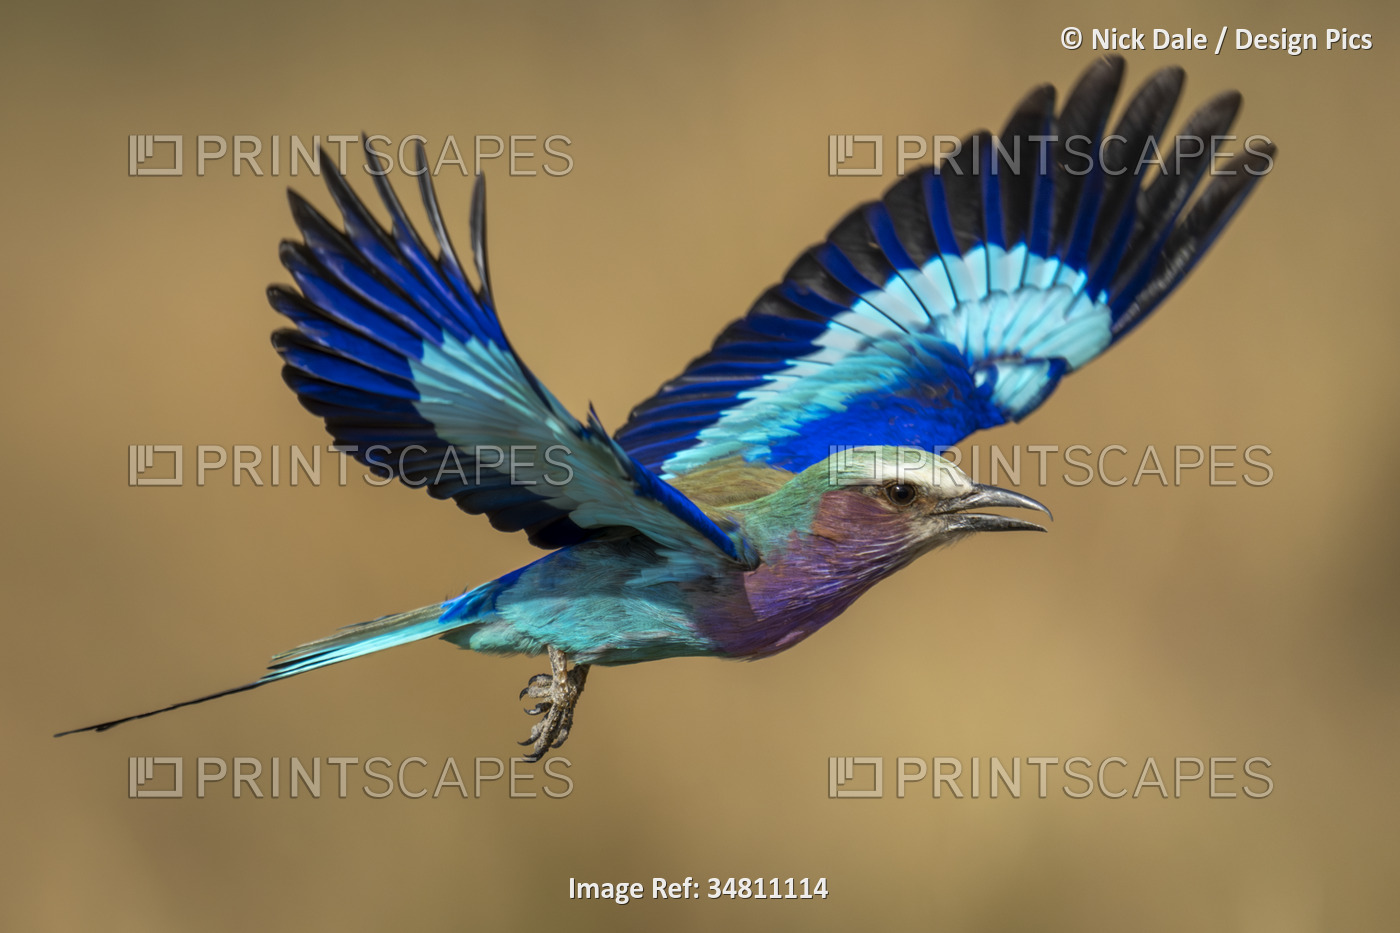 Lilac-breasted roller (Coracias caudatus) with a catchlight in its eye flies in ...